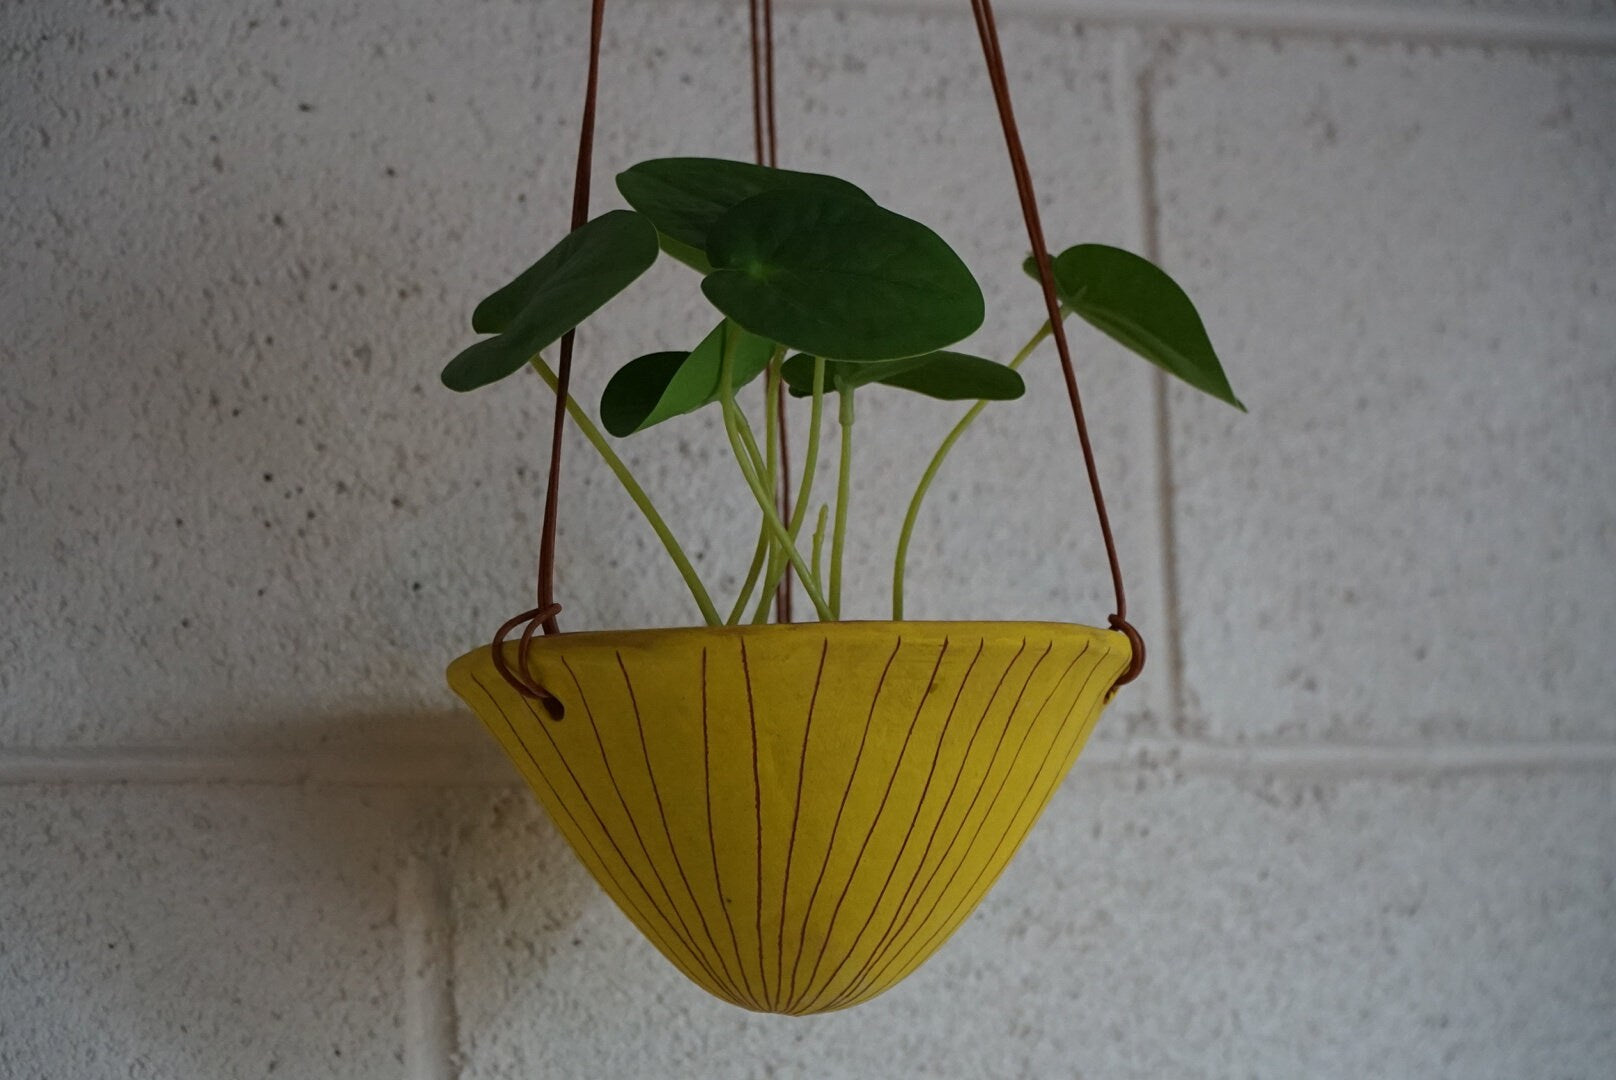 Bright Yellow & Terracotta Hanging Planter w/ Carved "Vertical Line" Design / Ceramic Hanging Pot / Pottery / Succulent / Houseplant